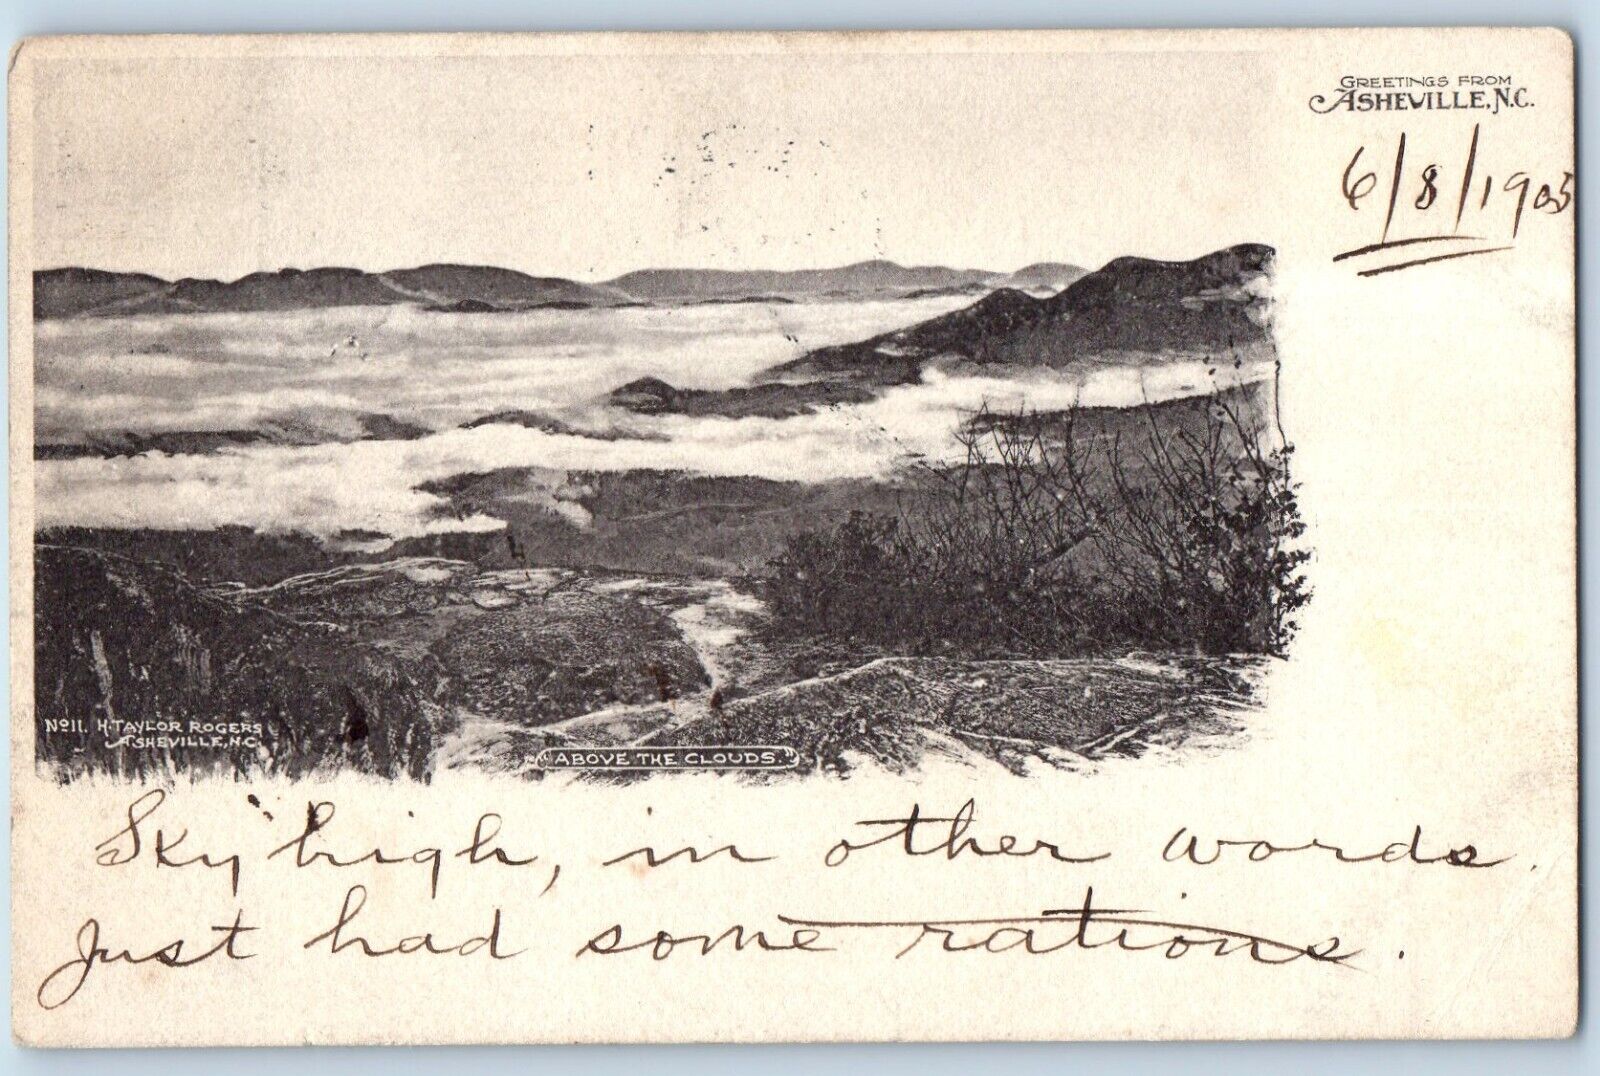 Asheville North Carolina Postcard Greetings Above The Clouds Mountain View c1905